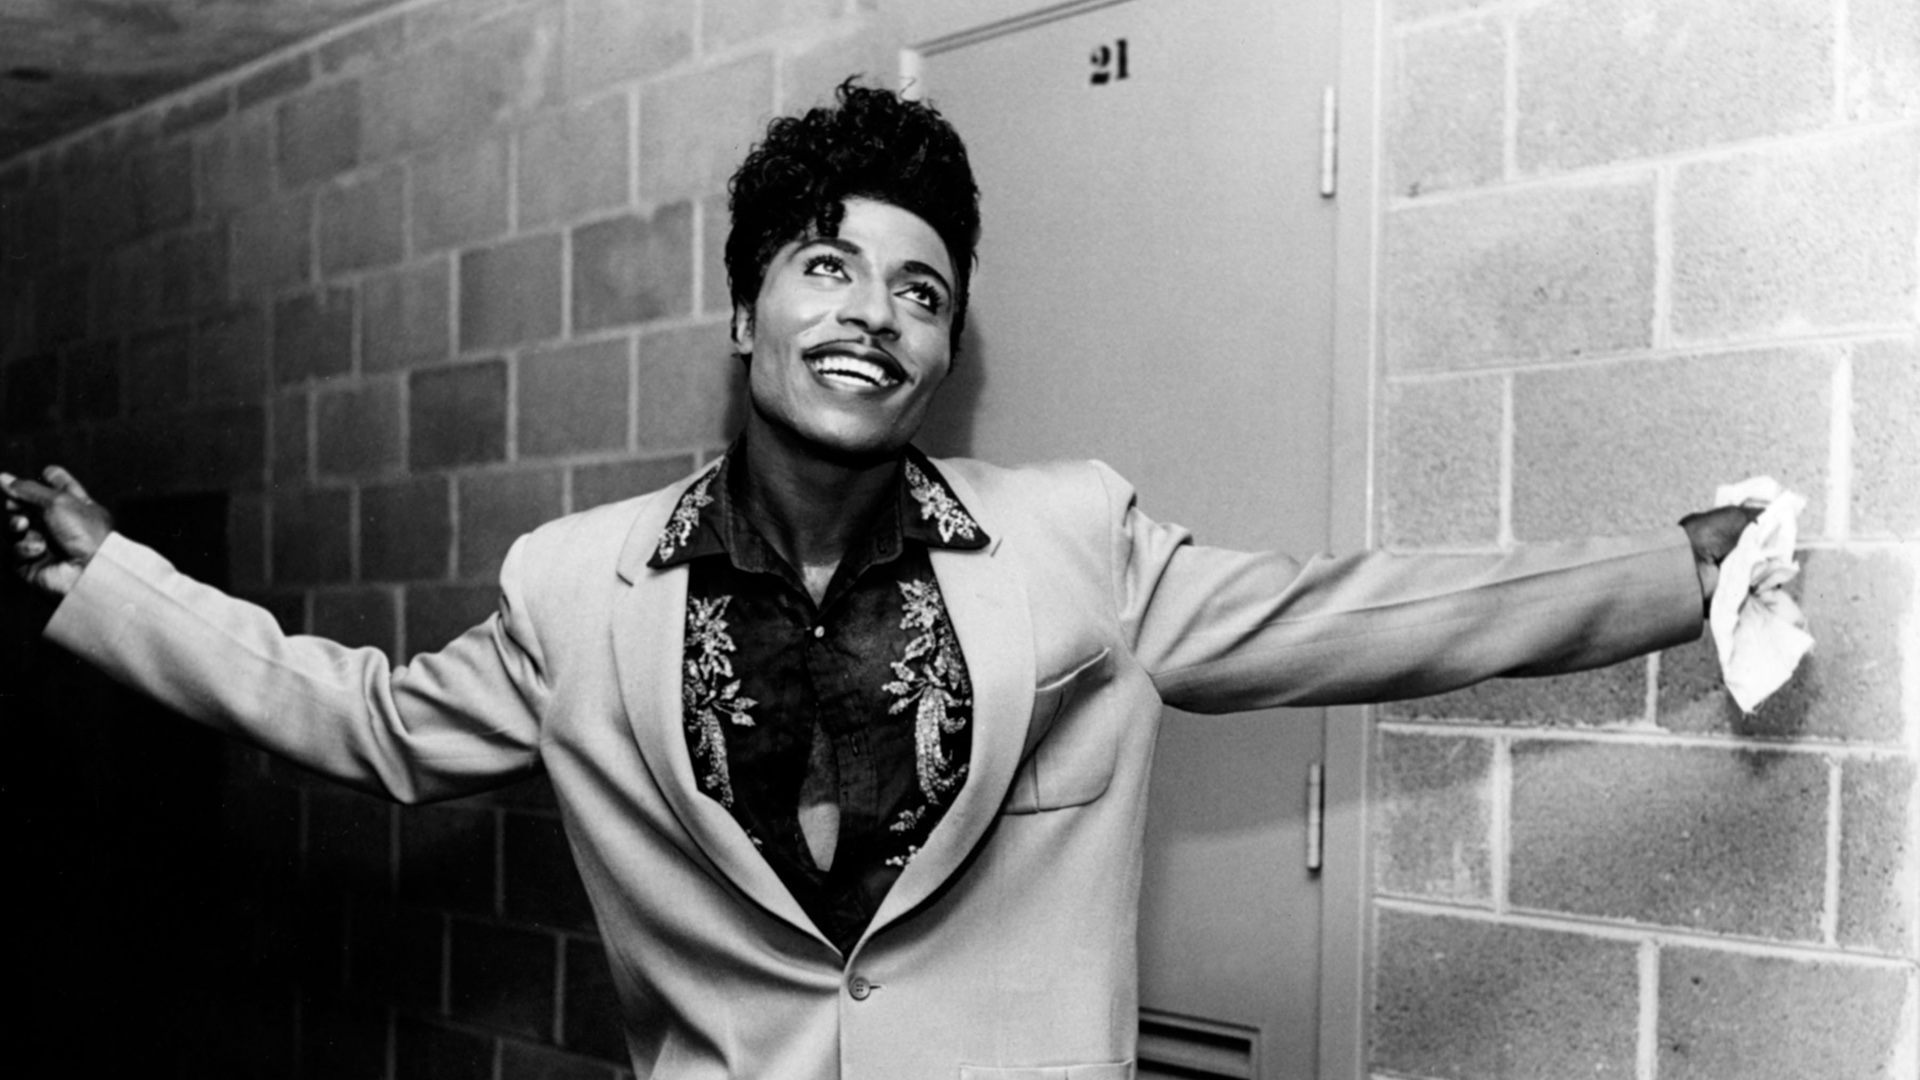 Musician Little Richard poses for the camera.